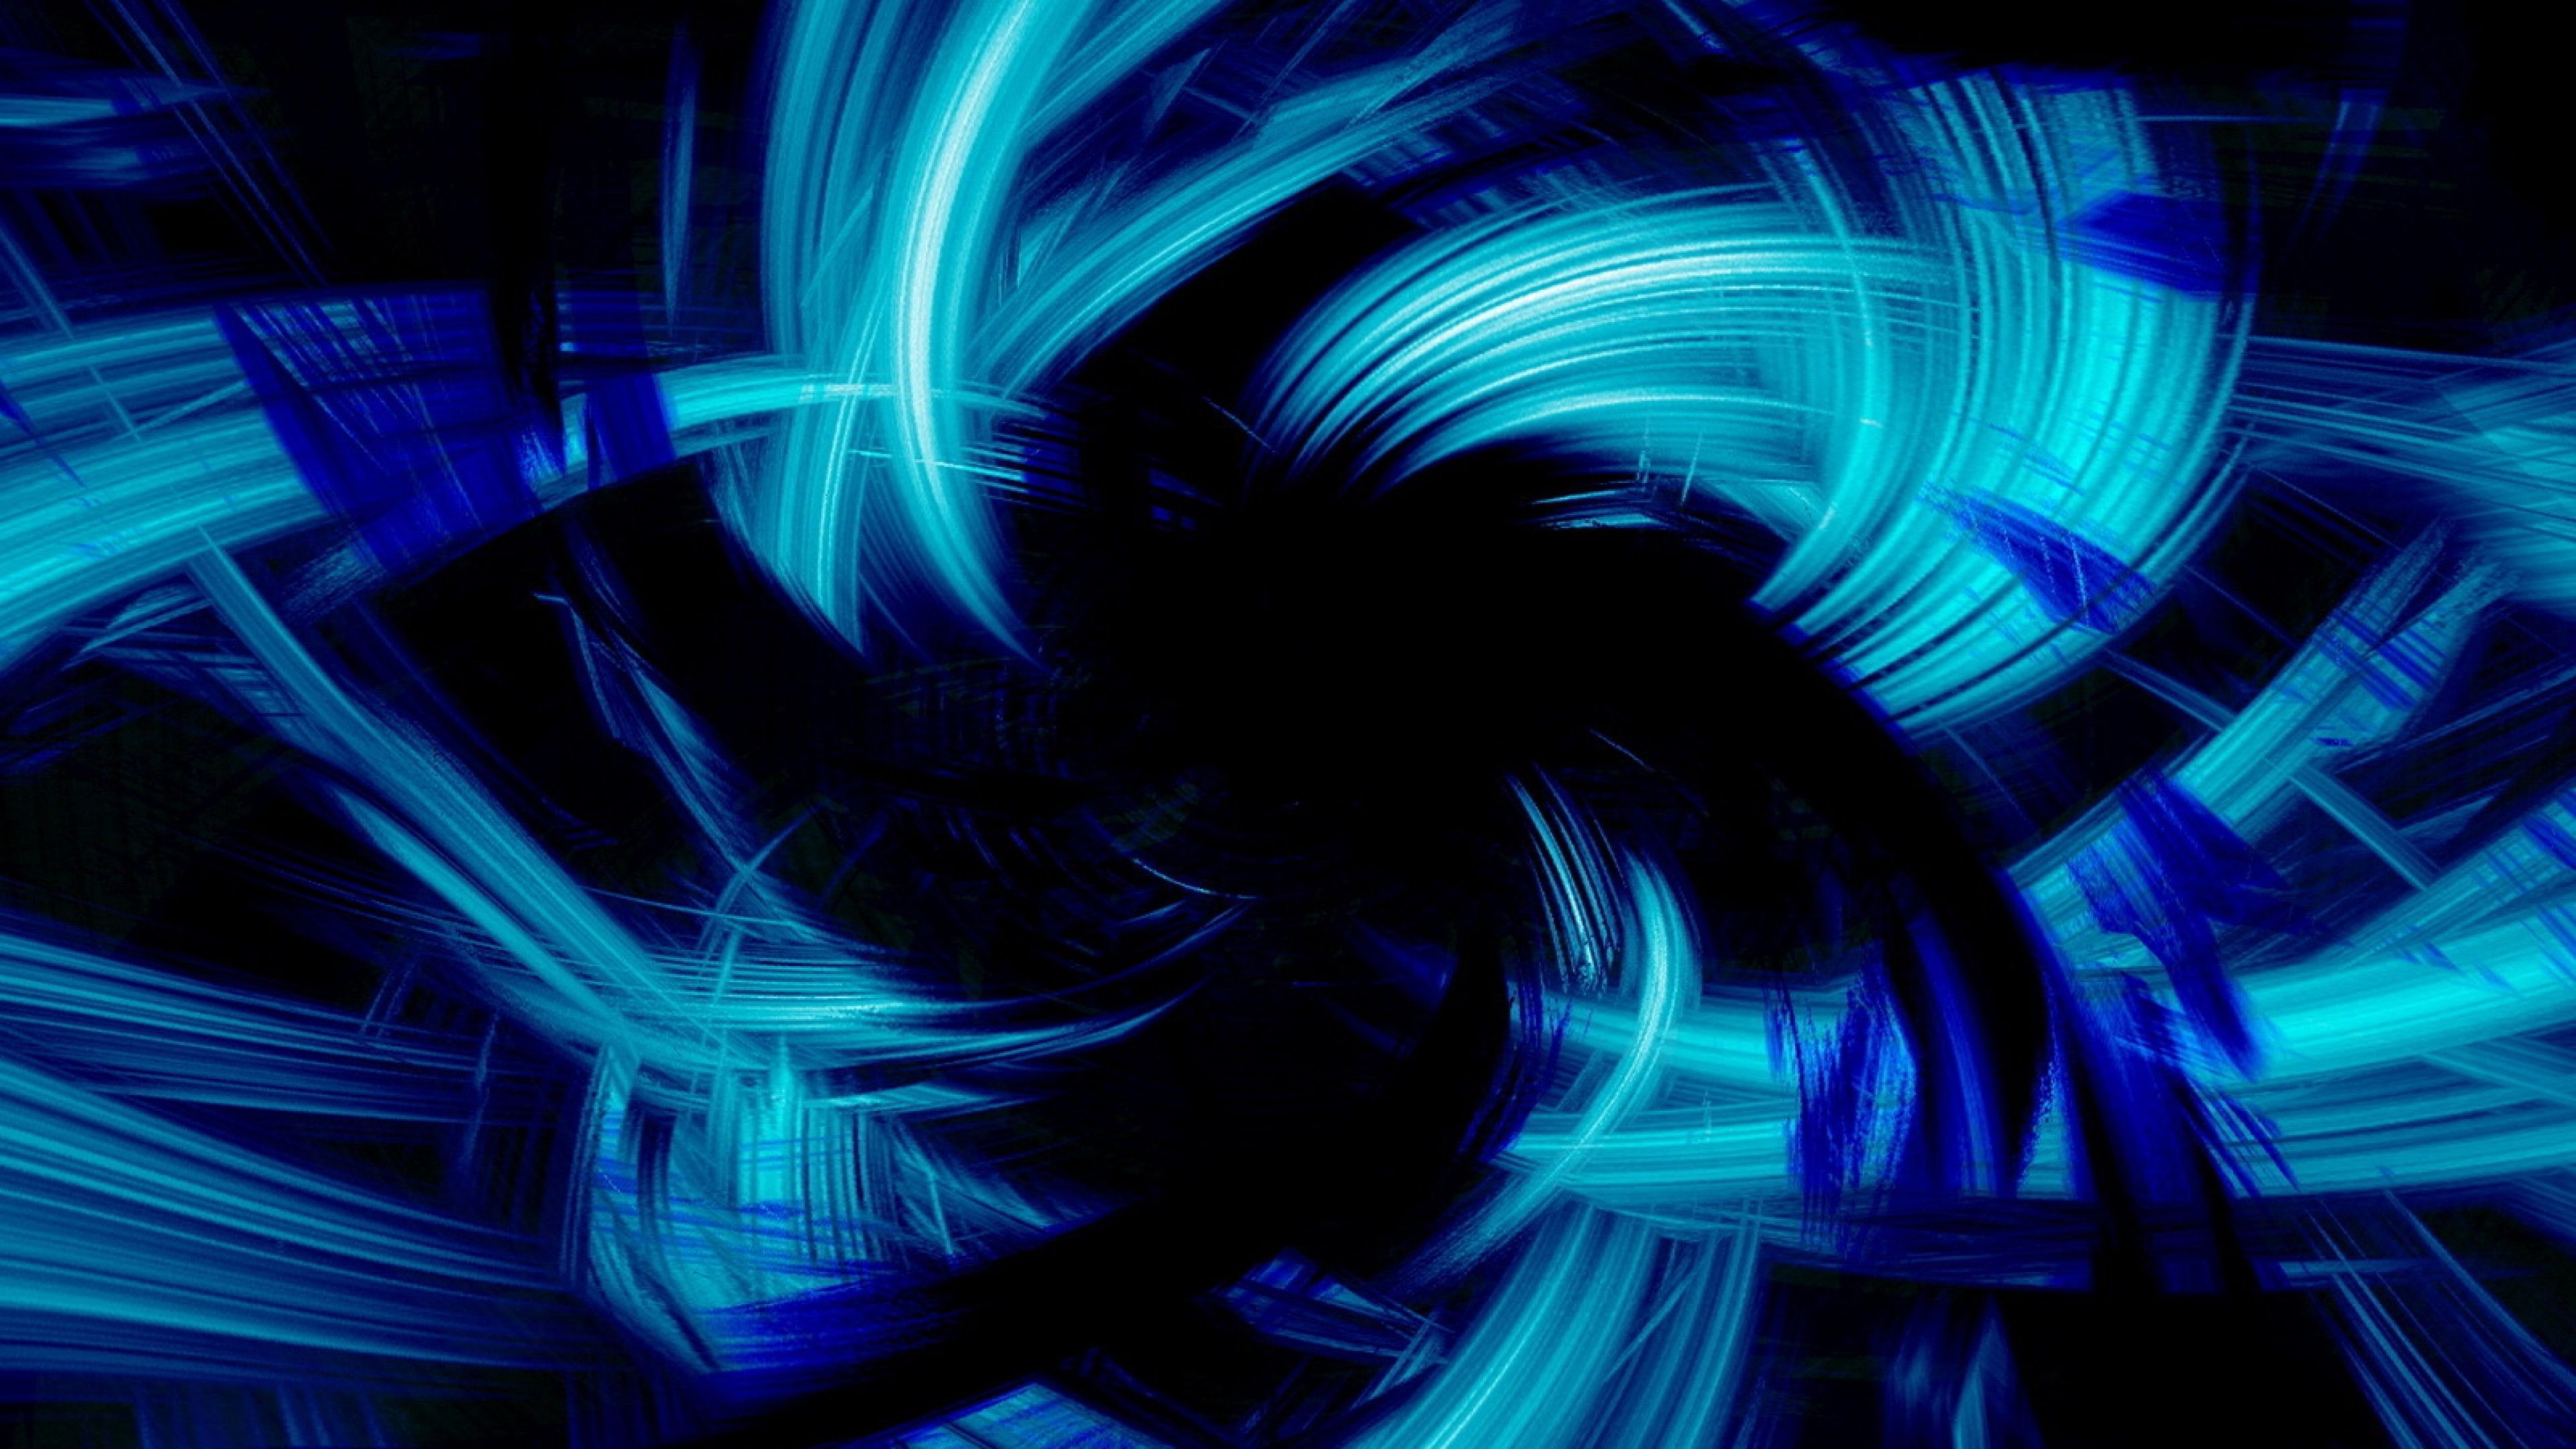 Ultra Hd Black And Blue Wallpaper 4K / Hd Black And Blue Wallpapers For Mobile Wallpaper Cave - See the best hd black and blue backgrounds collection.